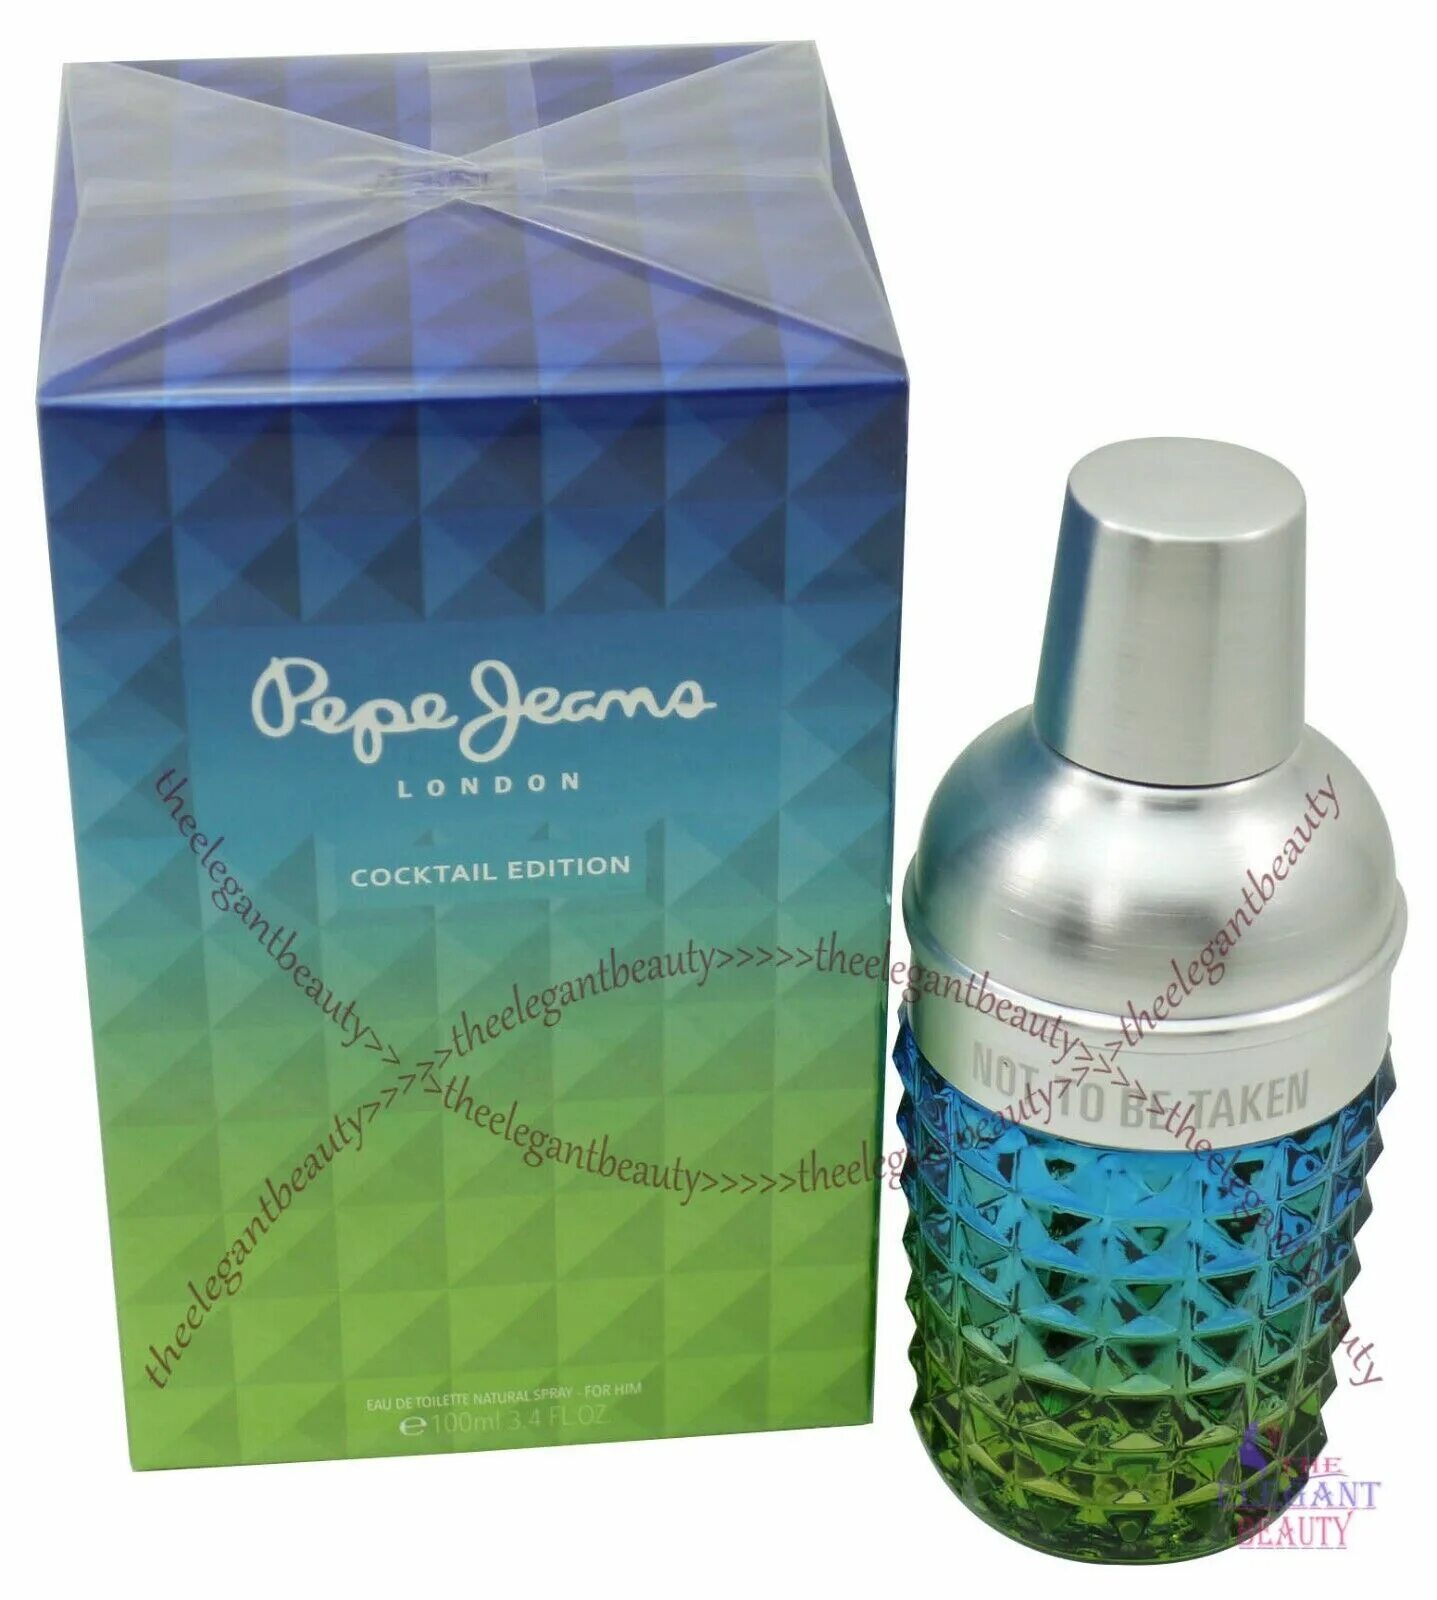 Pepe jeans cocktail edition. Туалетная вода Pepe Jeans Cocktail. Pepe Jeans for him туалетная вода мужская 50 мл. Духи мужские Pepe Jeans London celebrate for him. Pepe Jeans London духи.